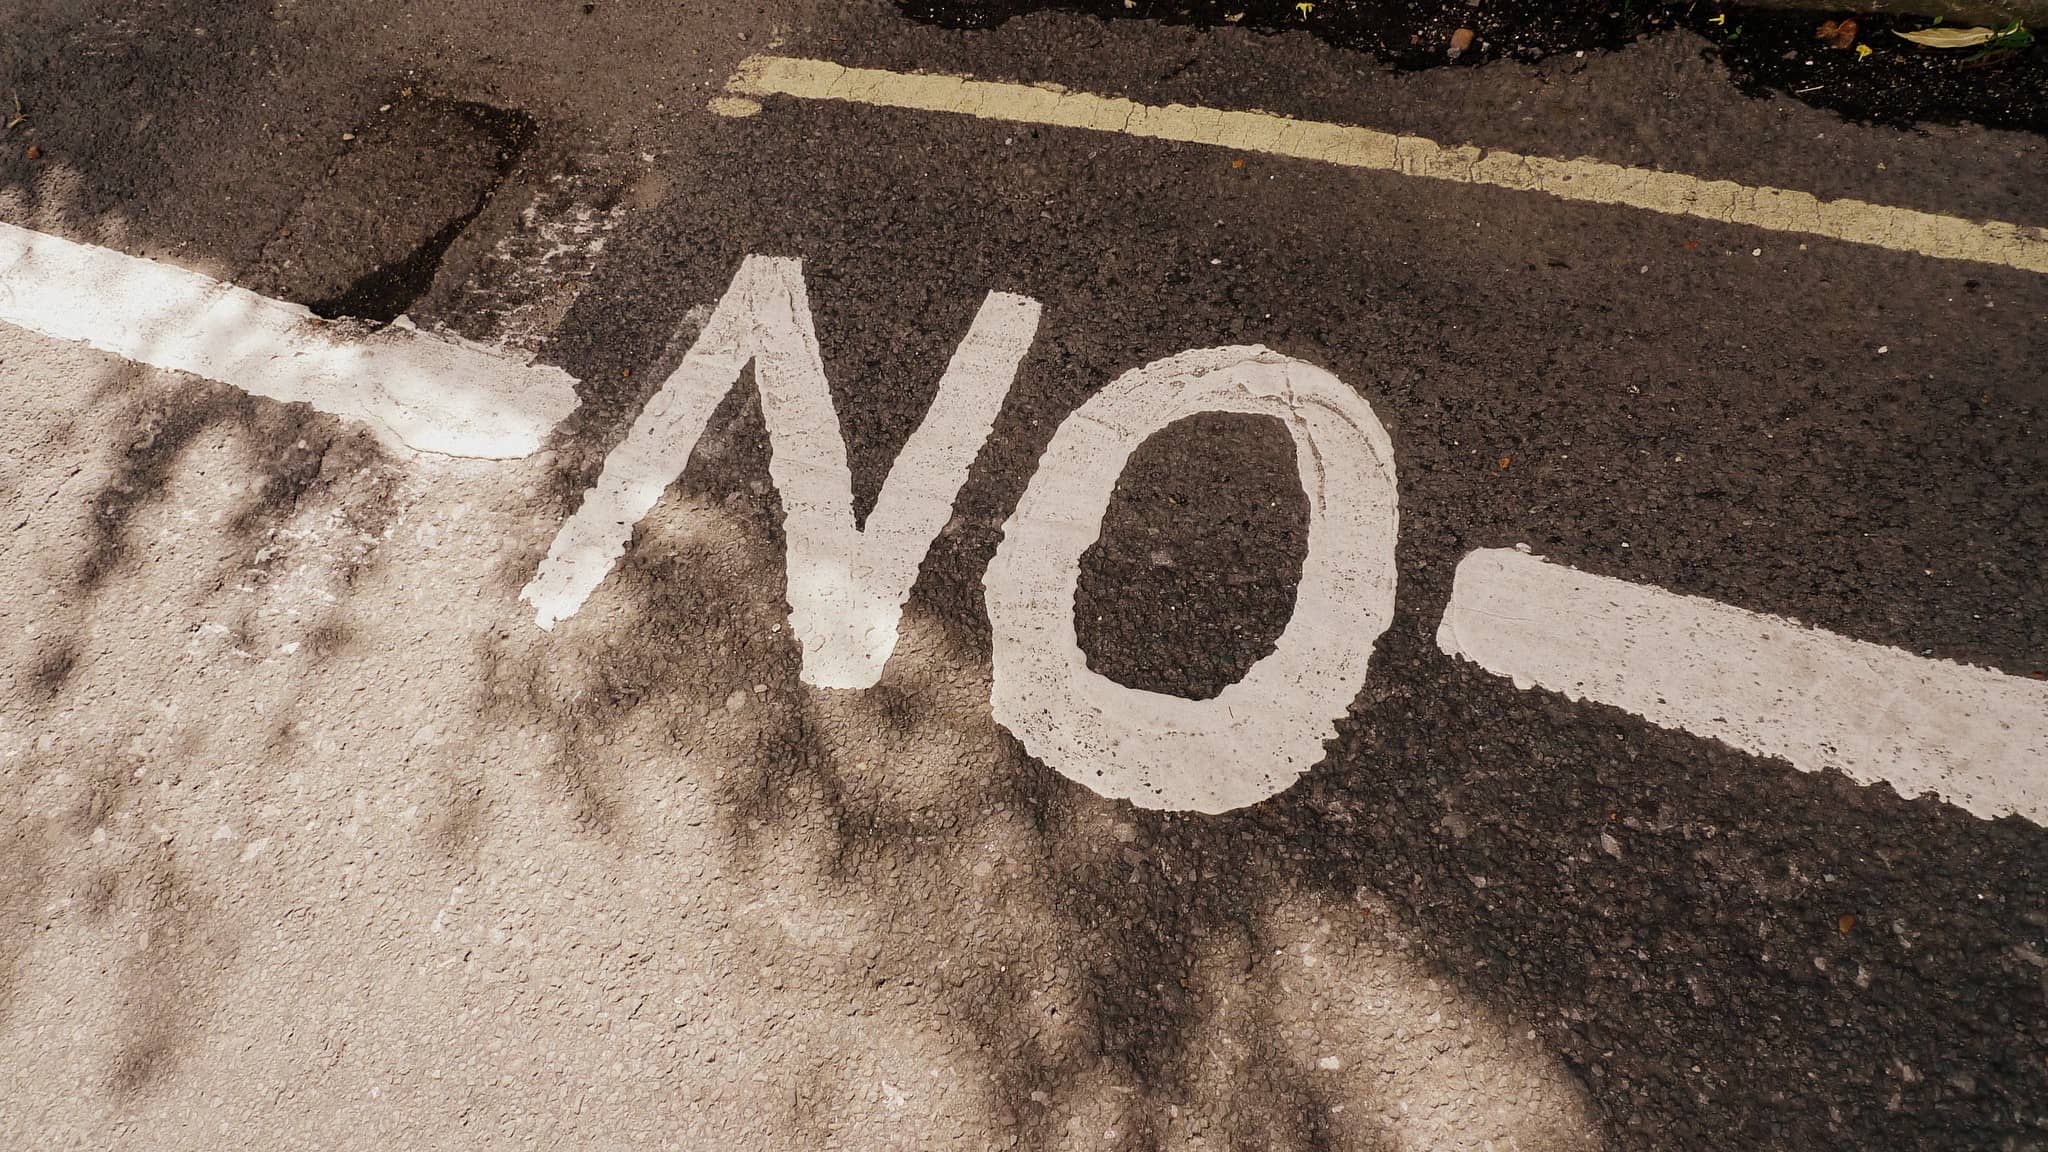 No written in white paint on road